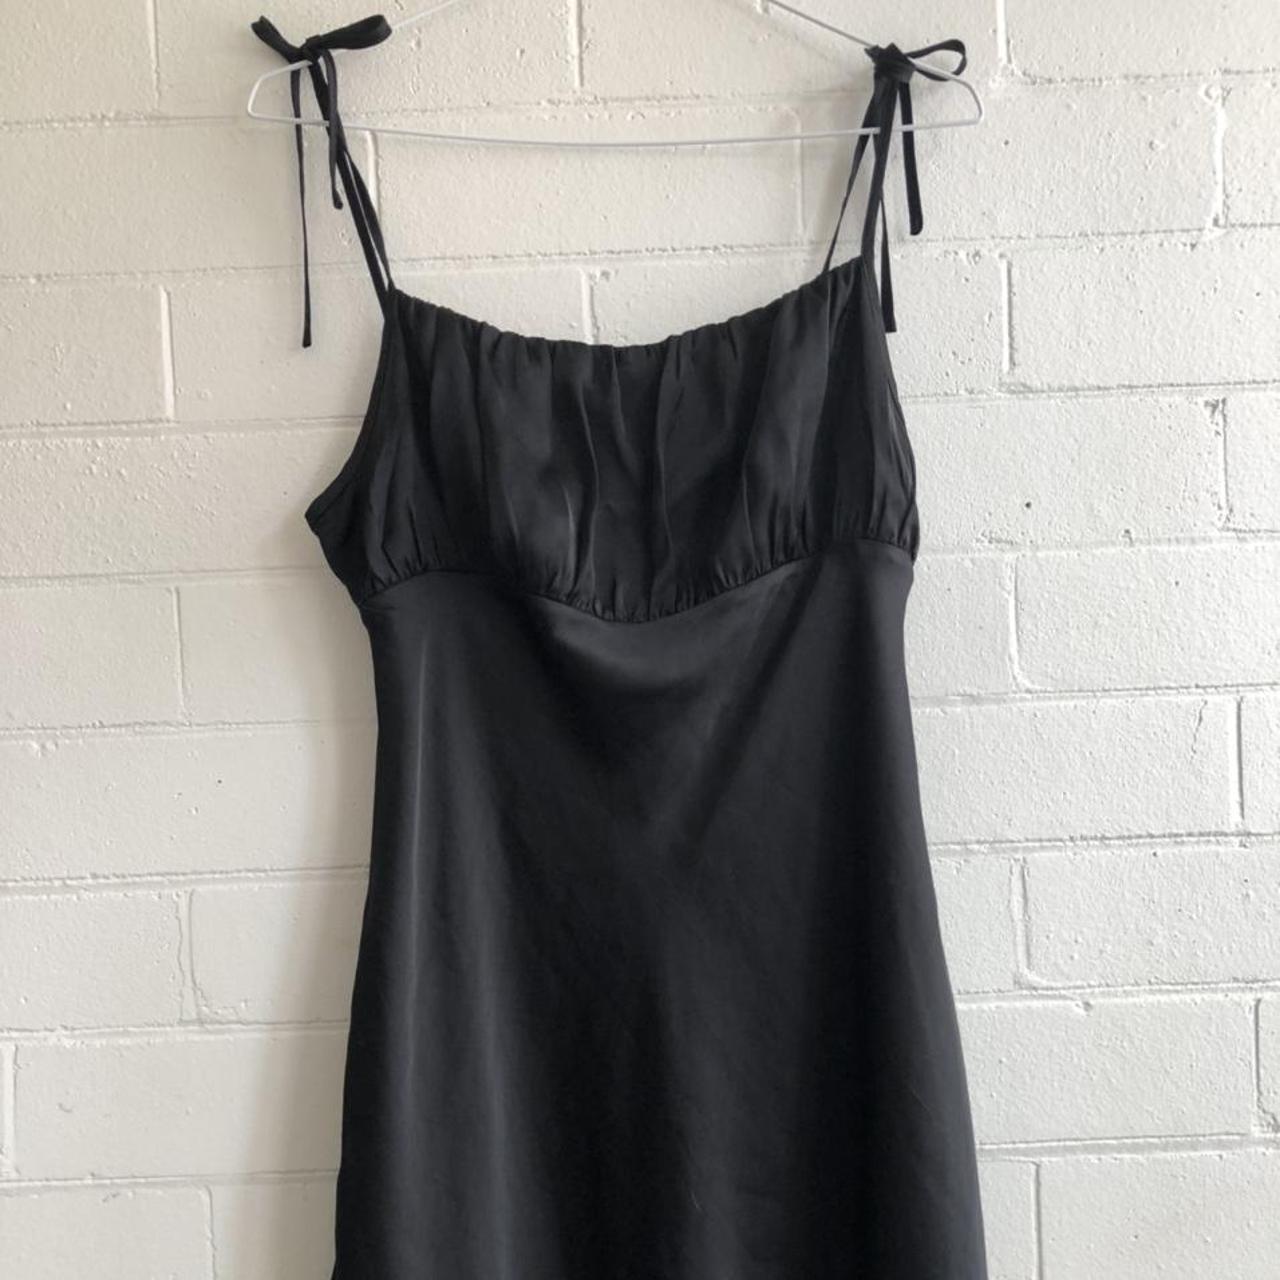 Black silky dress by Glassons Adjustable straps with... - Depop